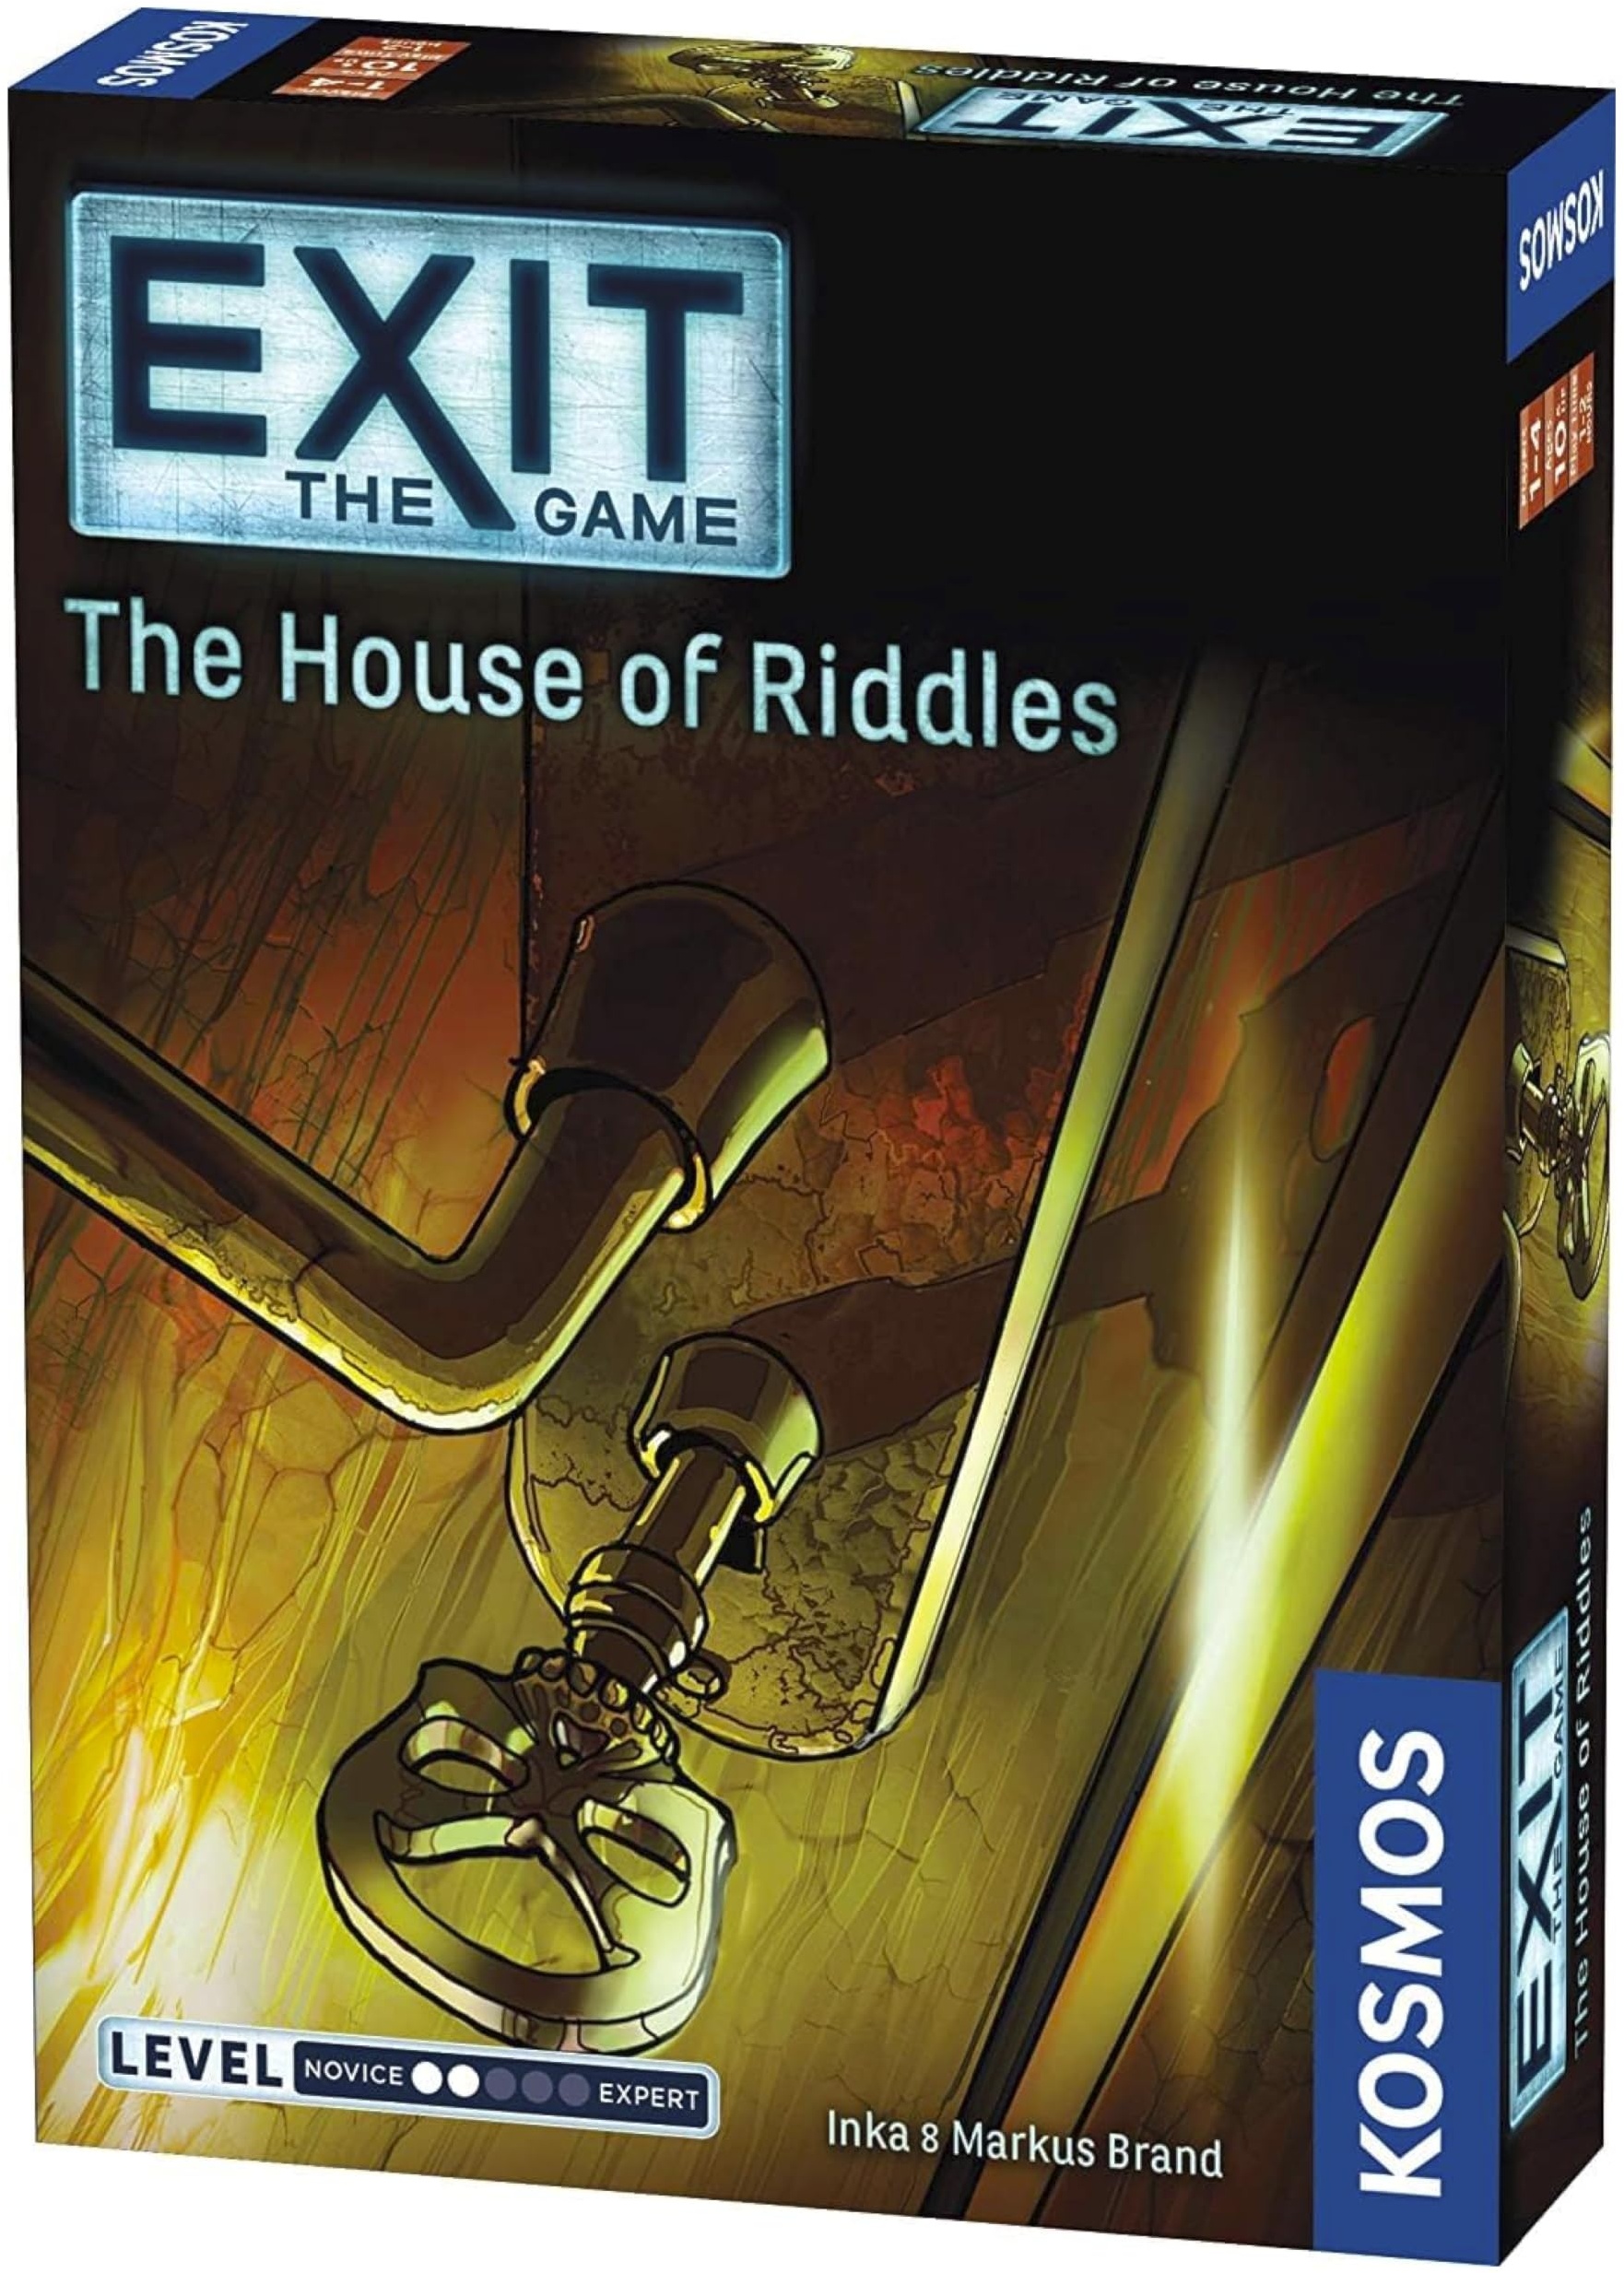 Thames & Kosmos - EXIT: The House of Riddles - Level: 2/5 - Unique Escape Room Game - 1-4 Players - Puzzle Solving Strategy Board Games for Adults & Kids, Ages 10+ - 694043